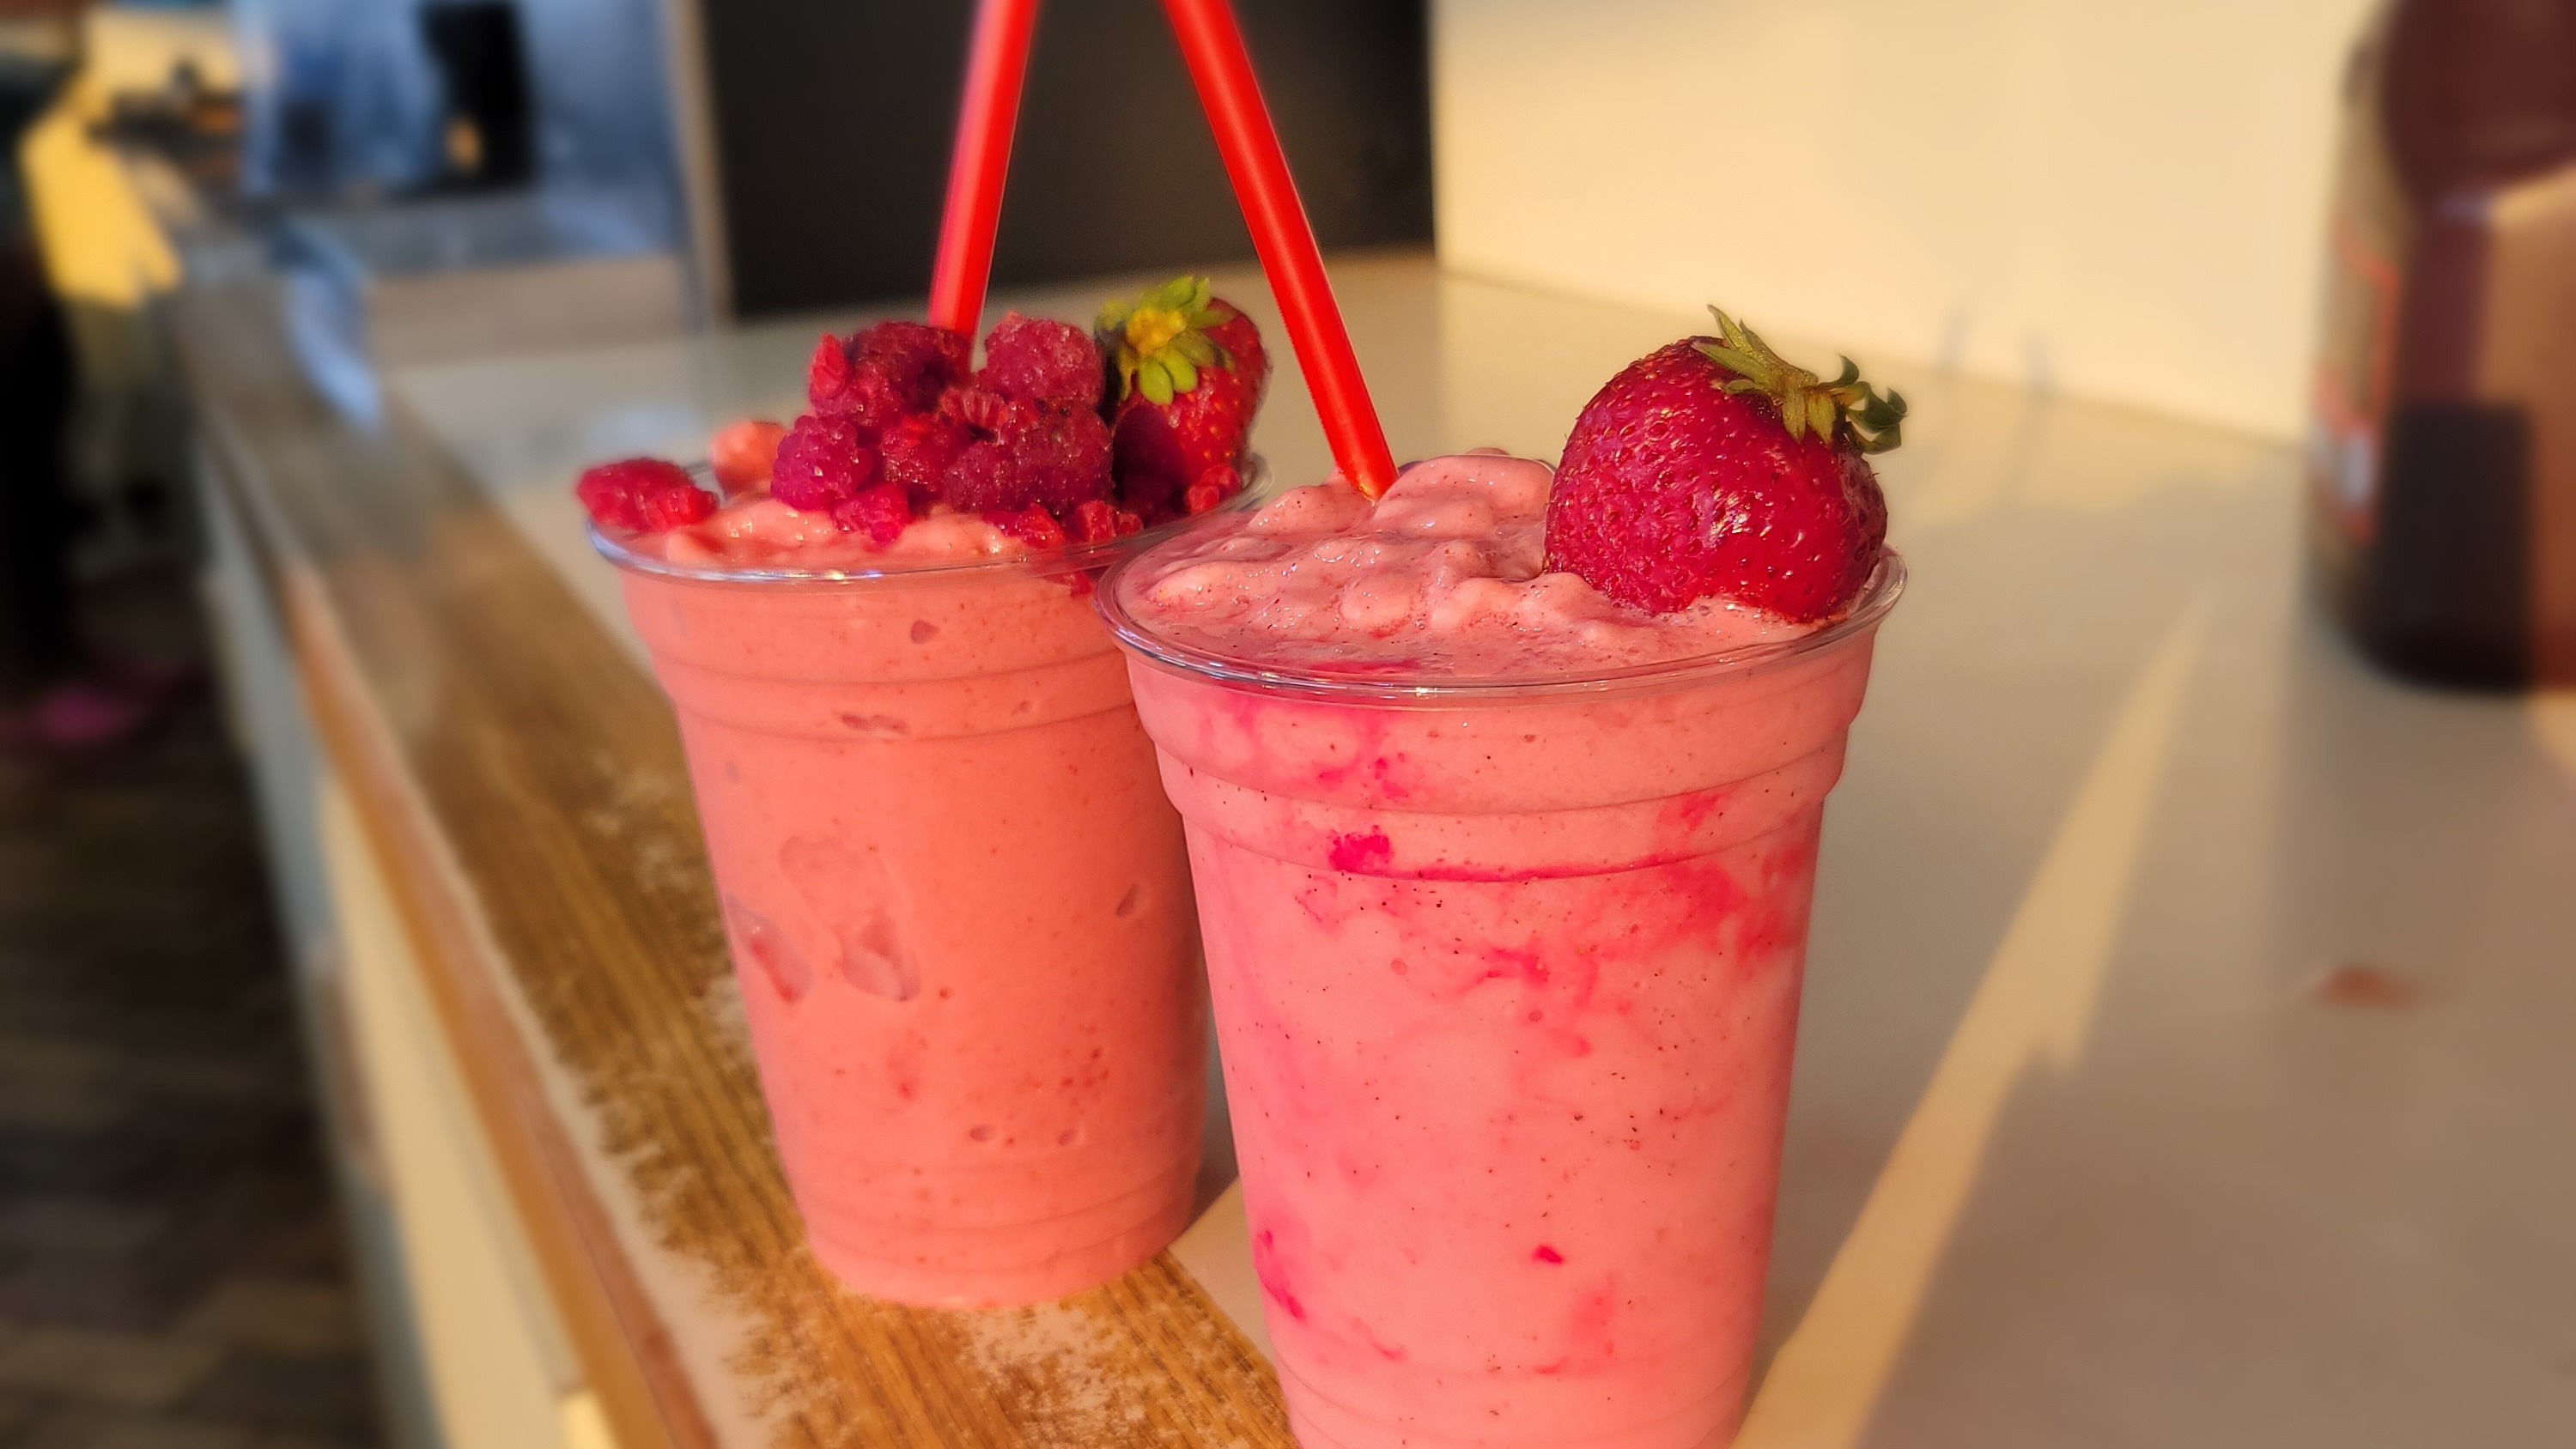 Berry Bay Smoothies's Menu: Prices and Deliver - Doordash